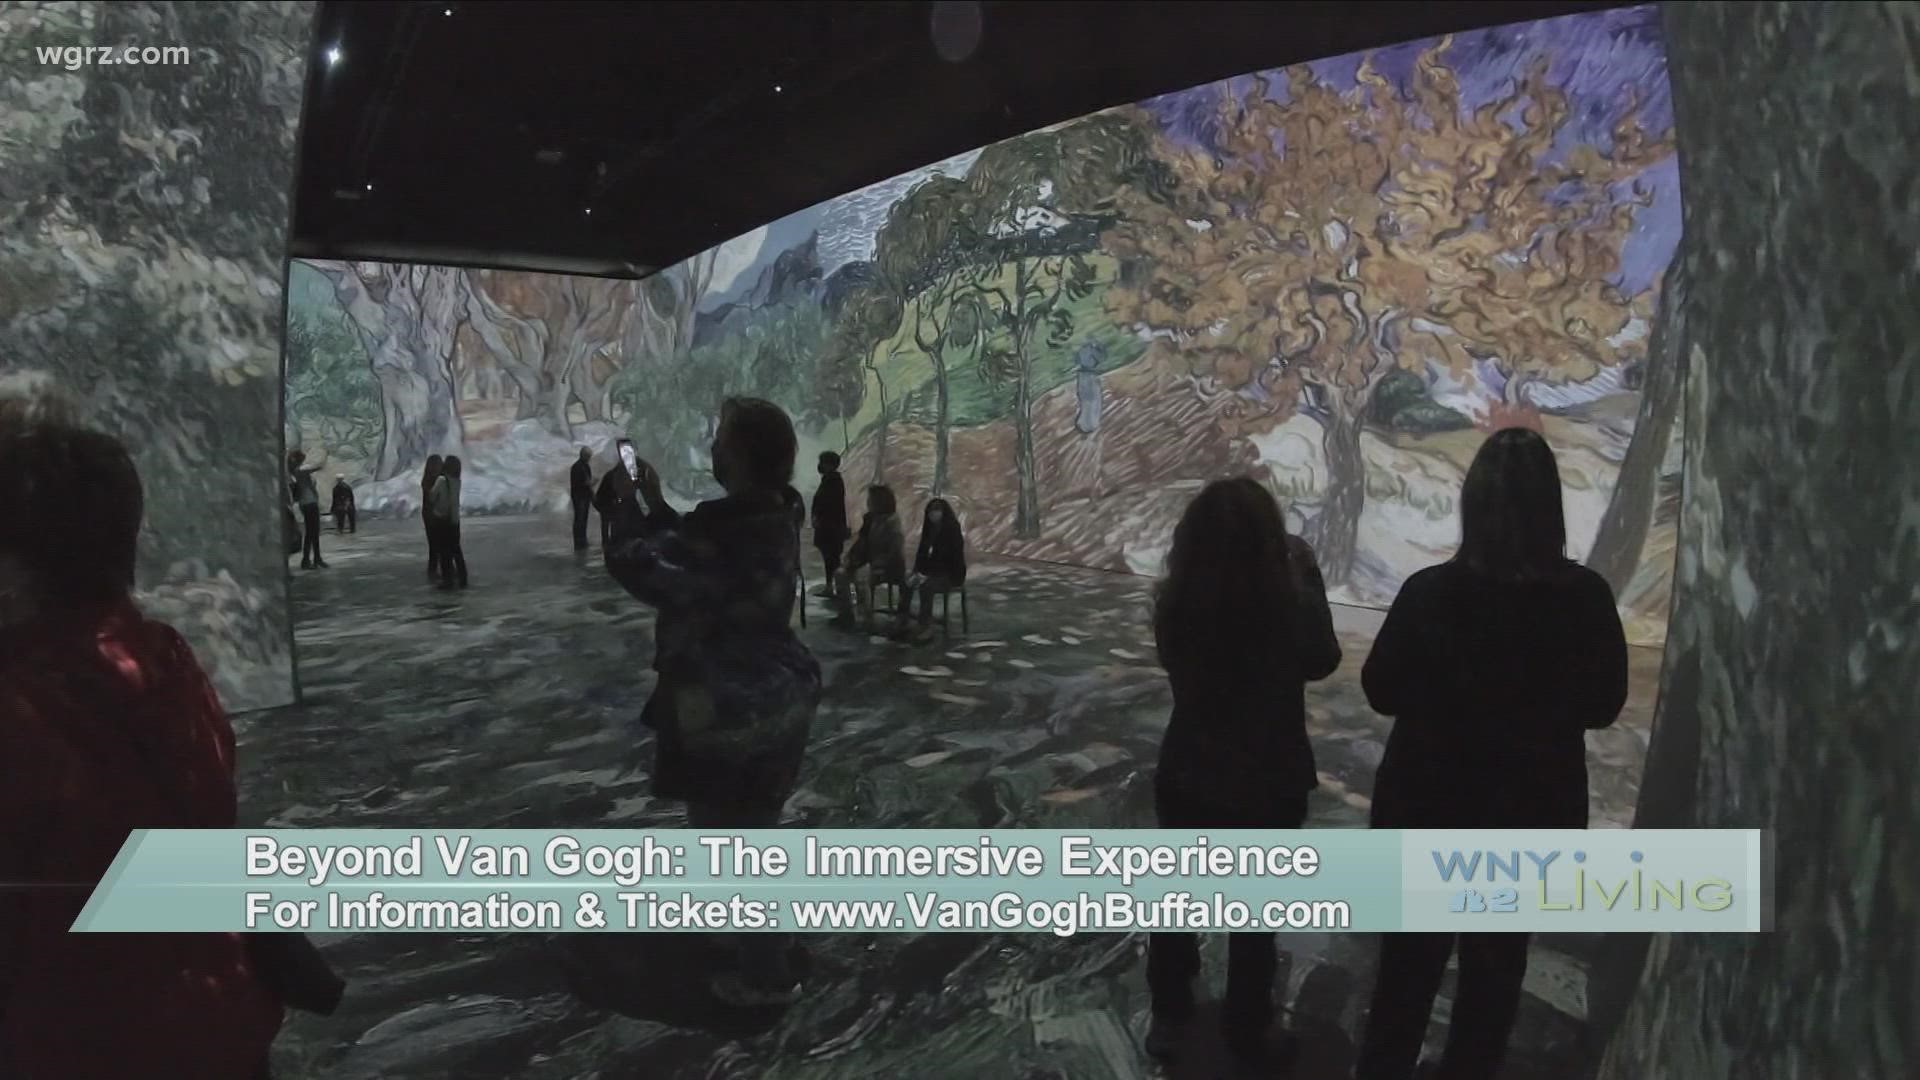 WNY Living - November 13 - Beyond Van Gogh: The Immersive Experience (THIS VIDEO IS SPONSORED BY BEYOND VAN GOGH: THE IMMERSIVE EXPERIENCE)